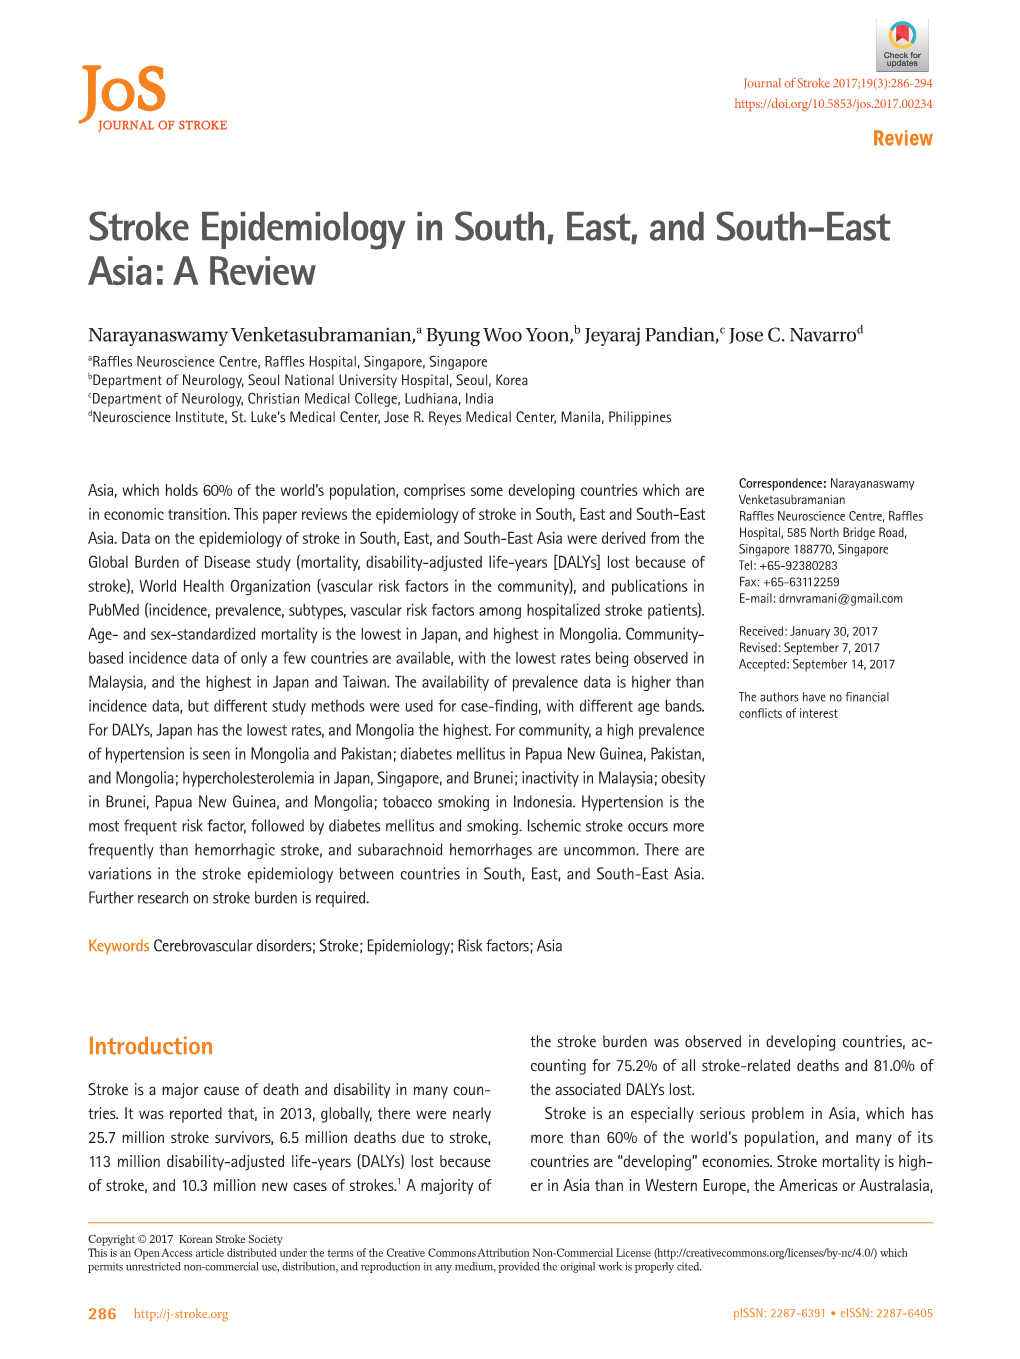 Stroke Epidemiology in South, East, and South-East Asia: a Review